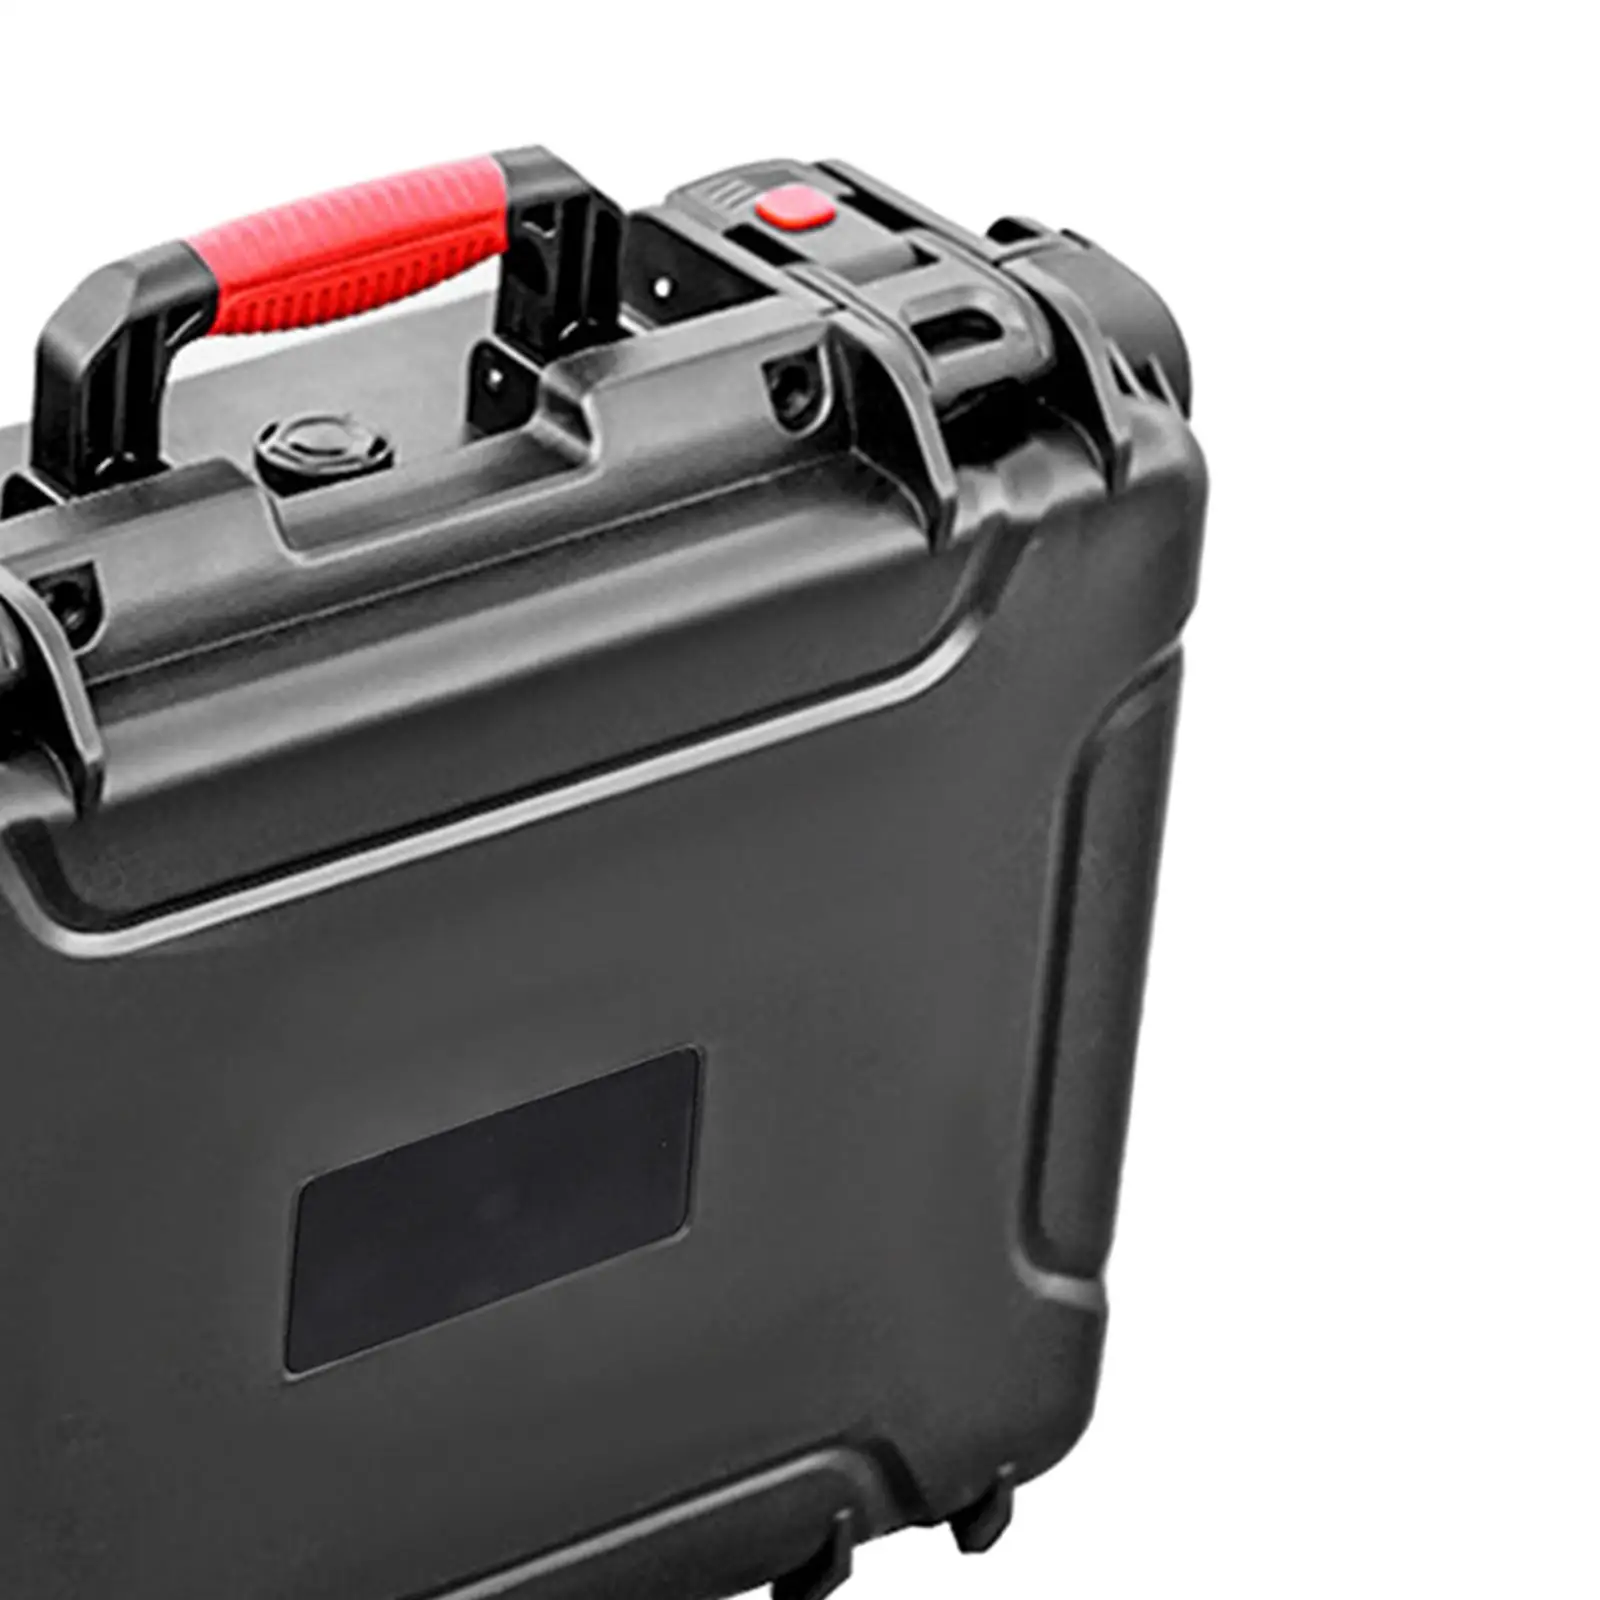 Hard Case Drone Body Storage Shockproof Travel Carry Case IP67 Waterproof RC Drone Suitcase Case for Air 3 Drone and Accessories